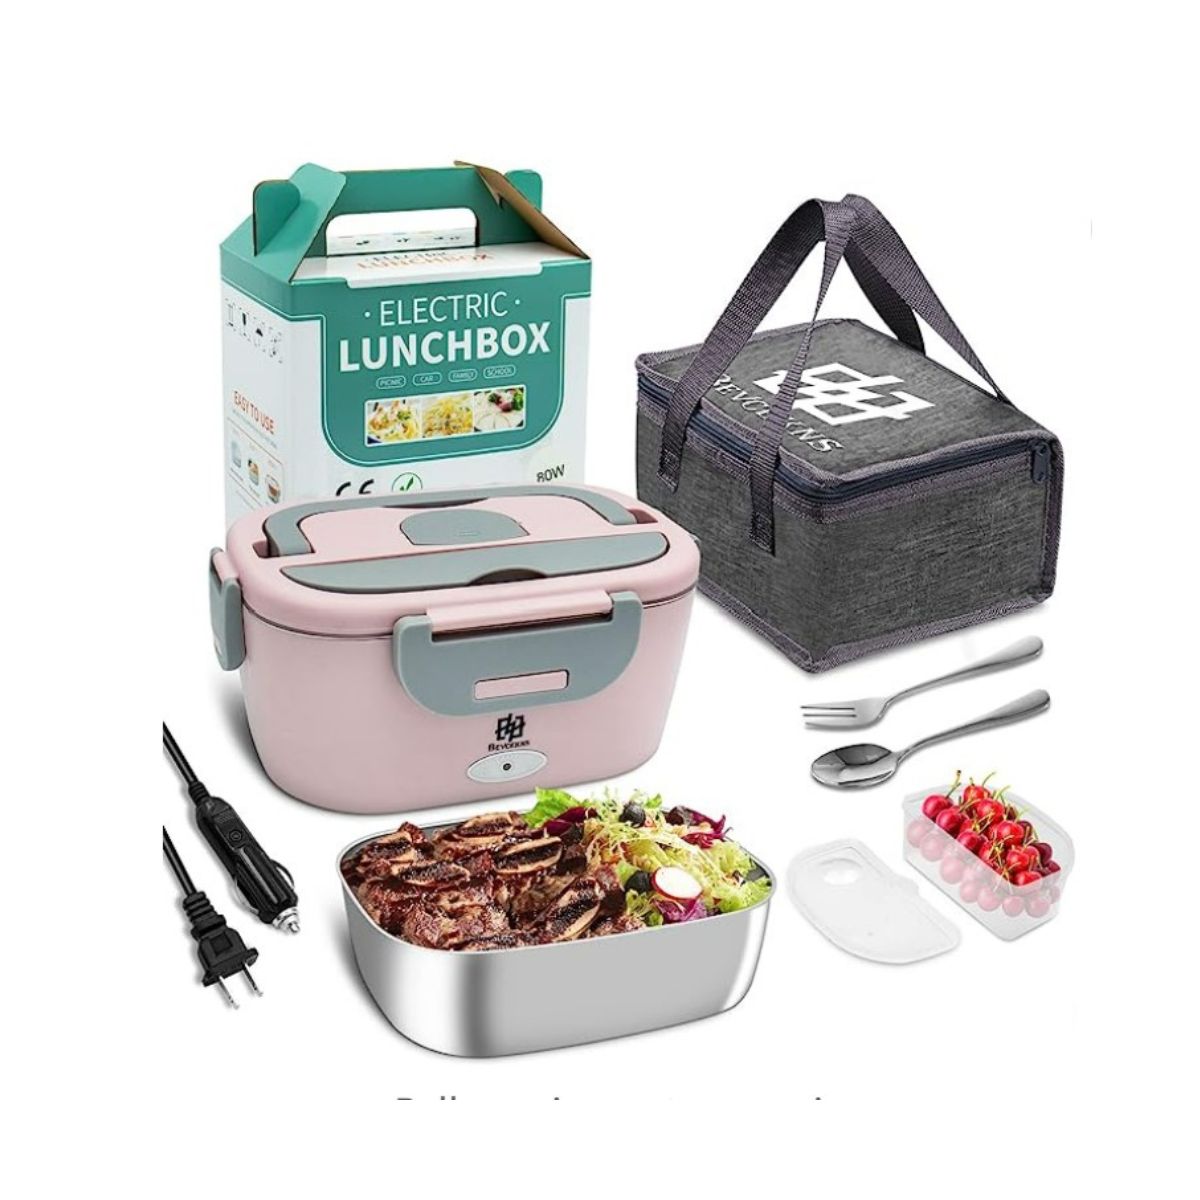 Pink electric lunch box with ribs in stainless steel container and cherries in fruit container